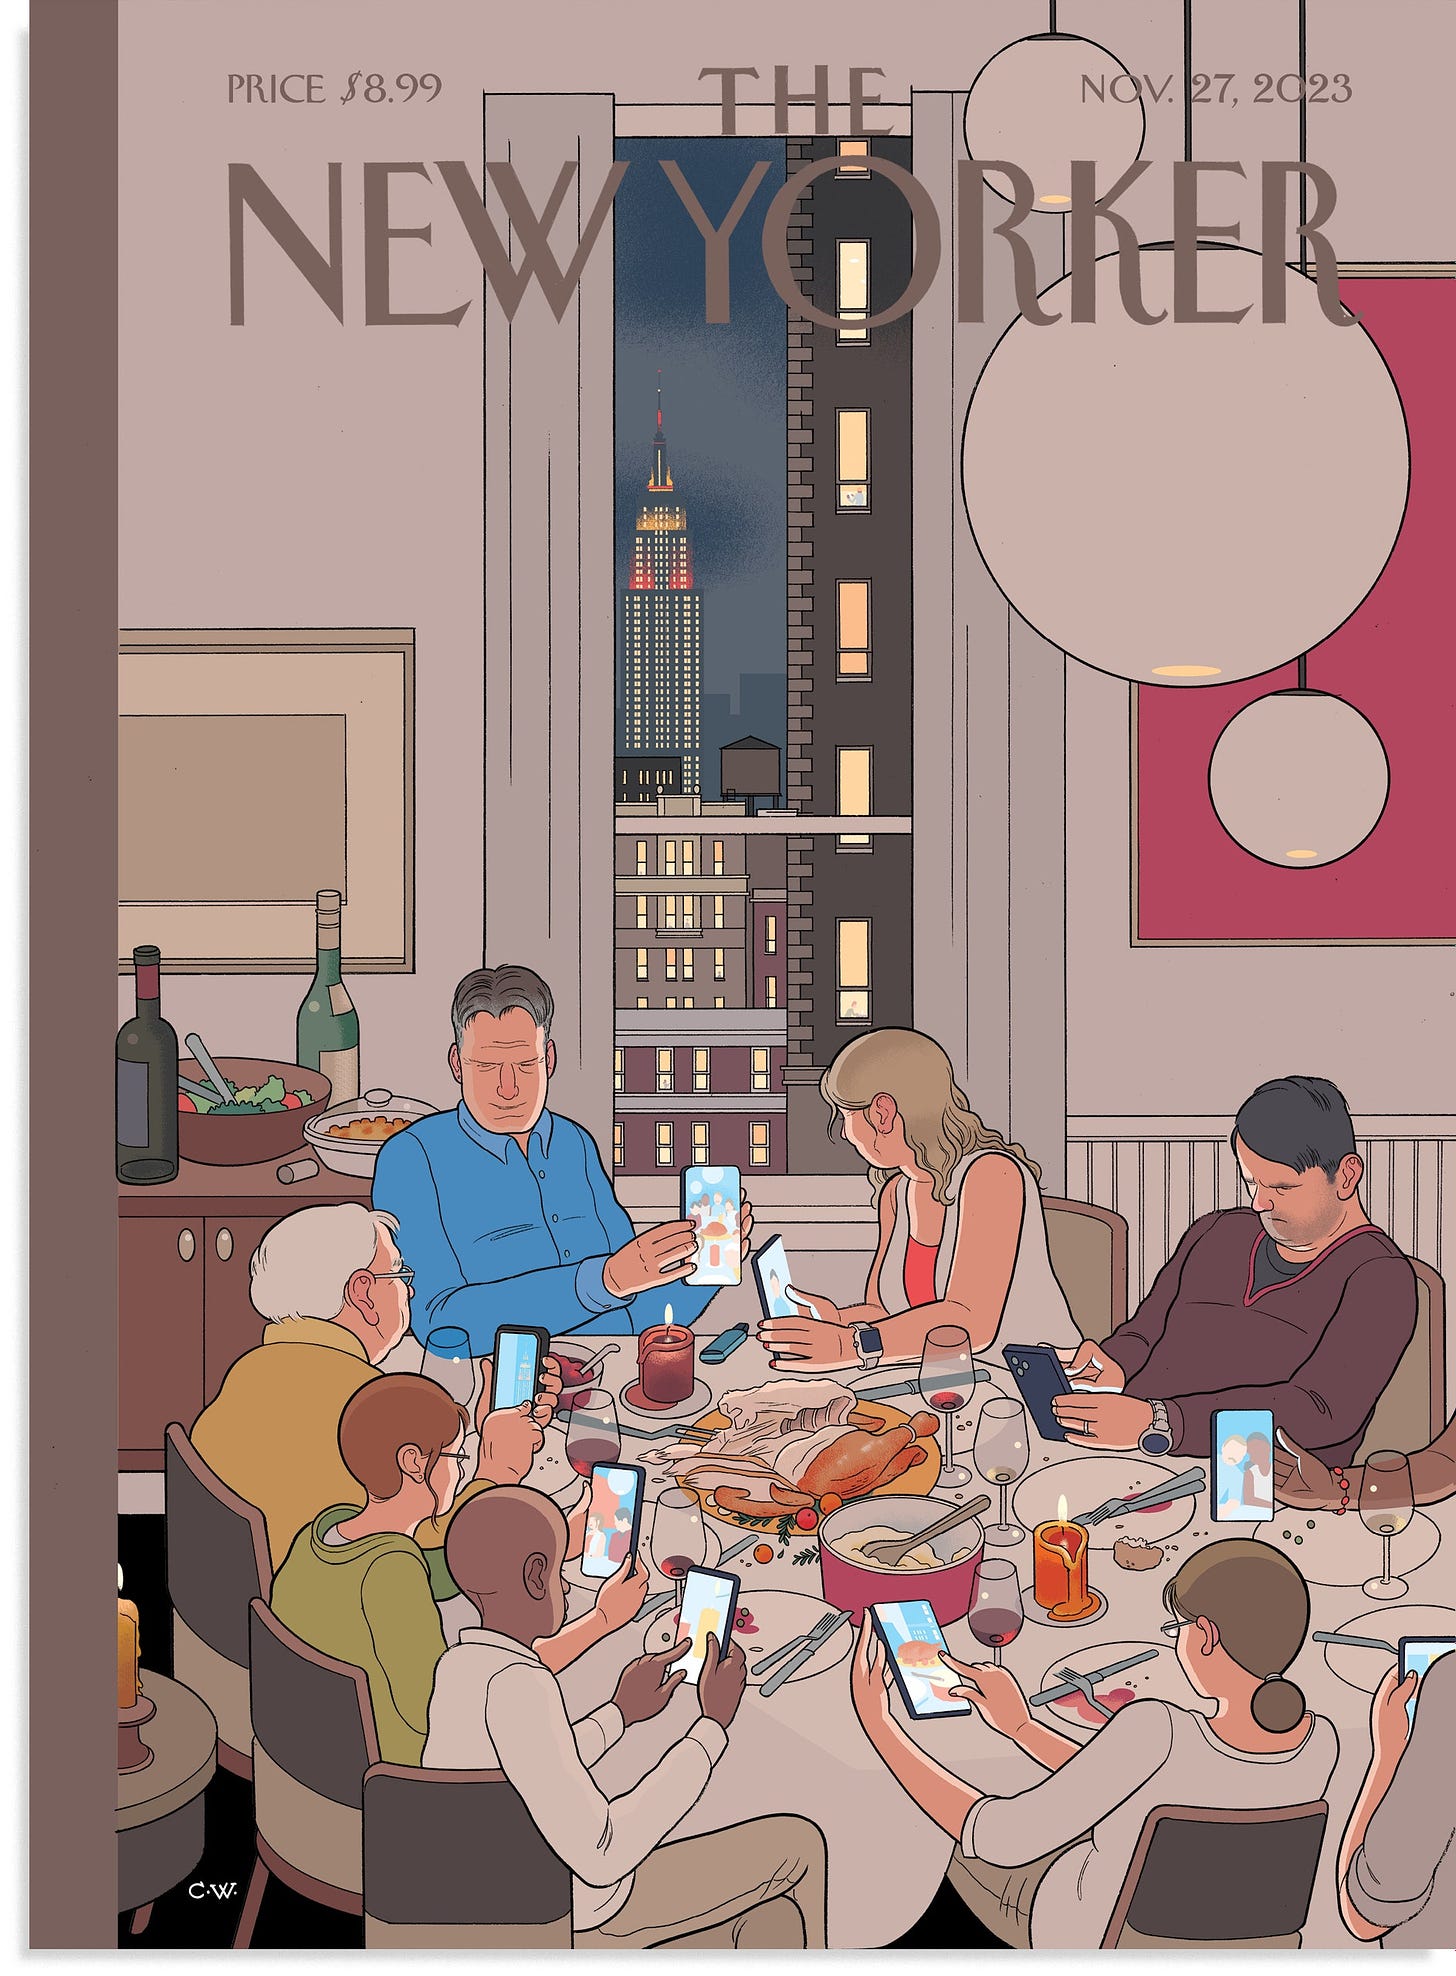 Thanksgiving cover de The New Yorker